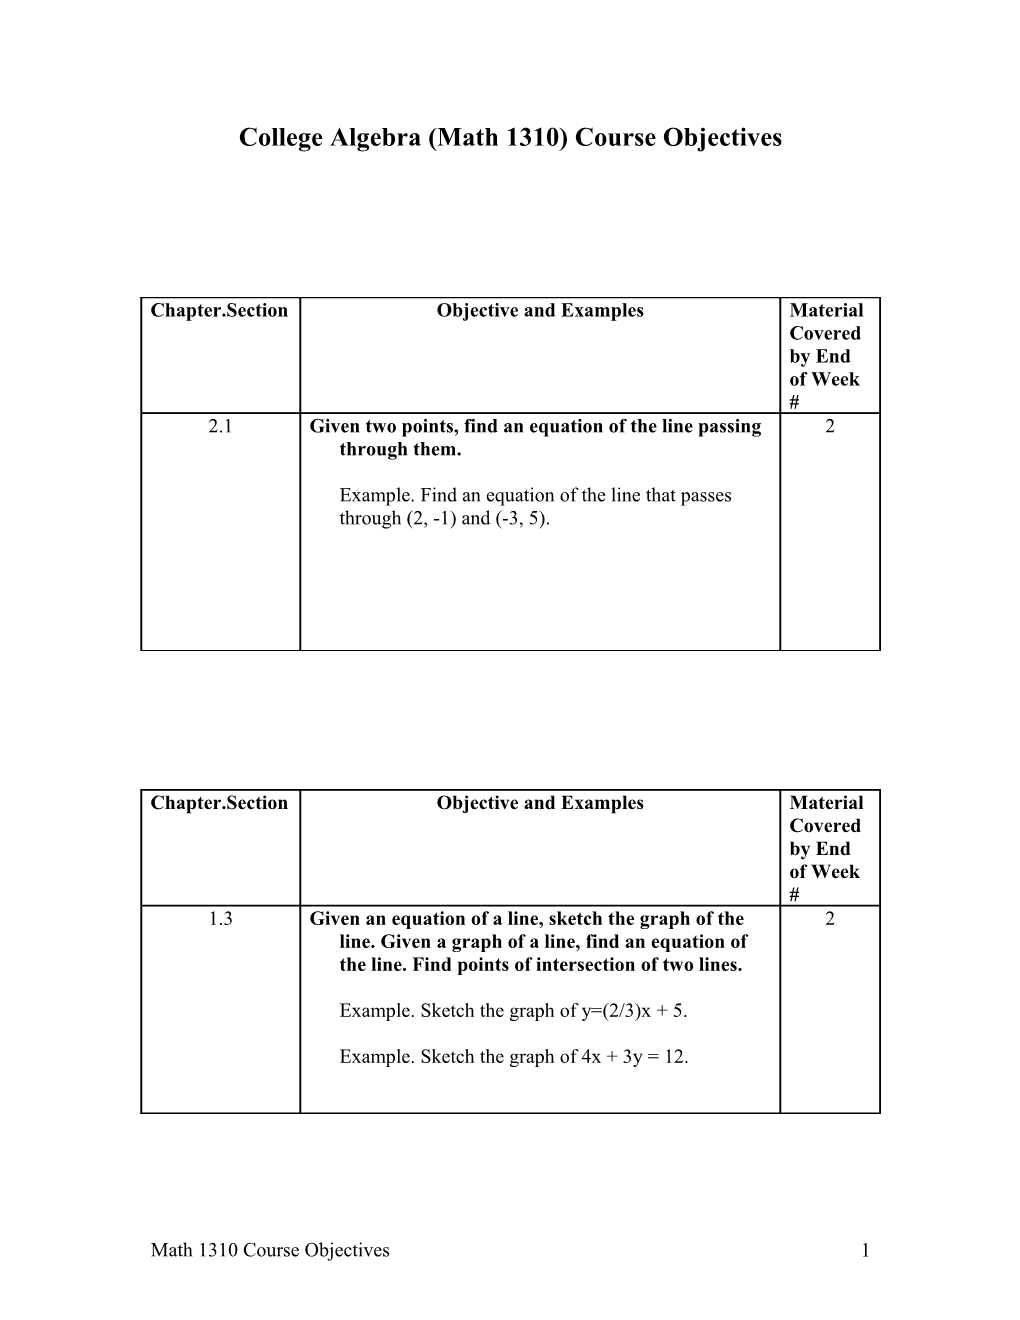 College Algebra (Math 1310) Course Objectives